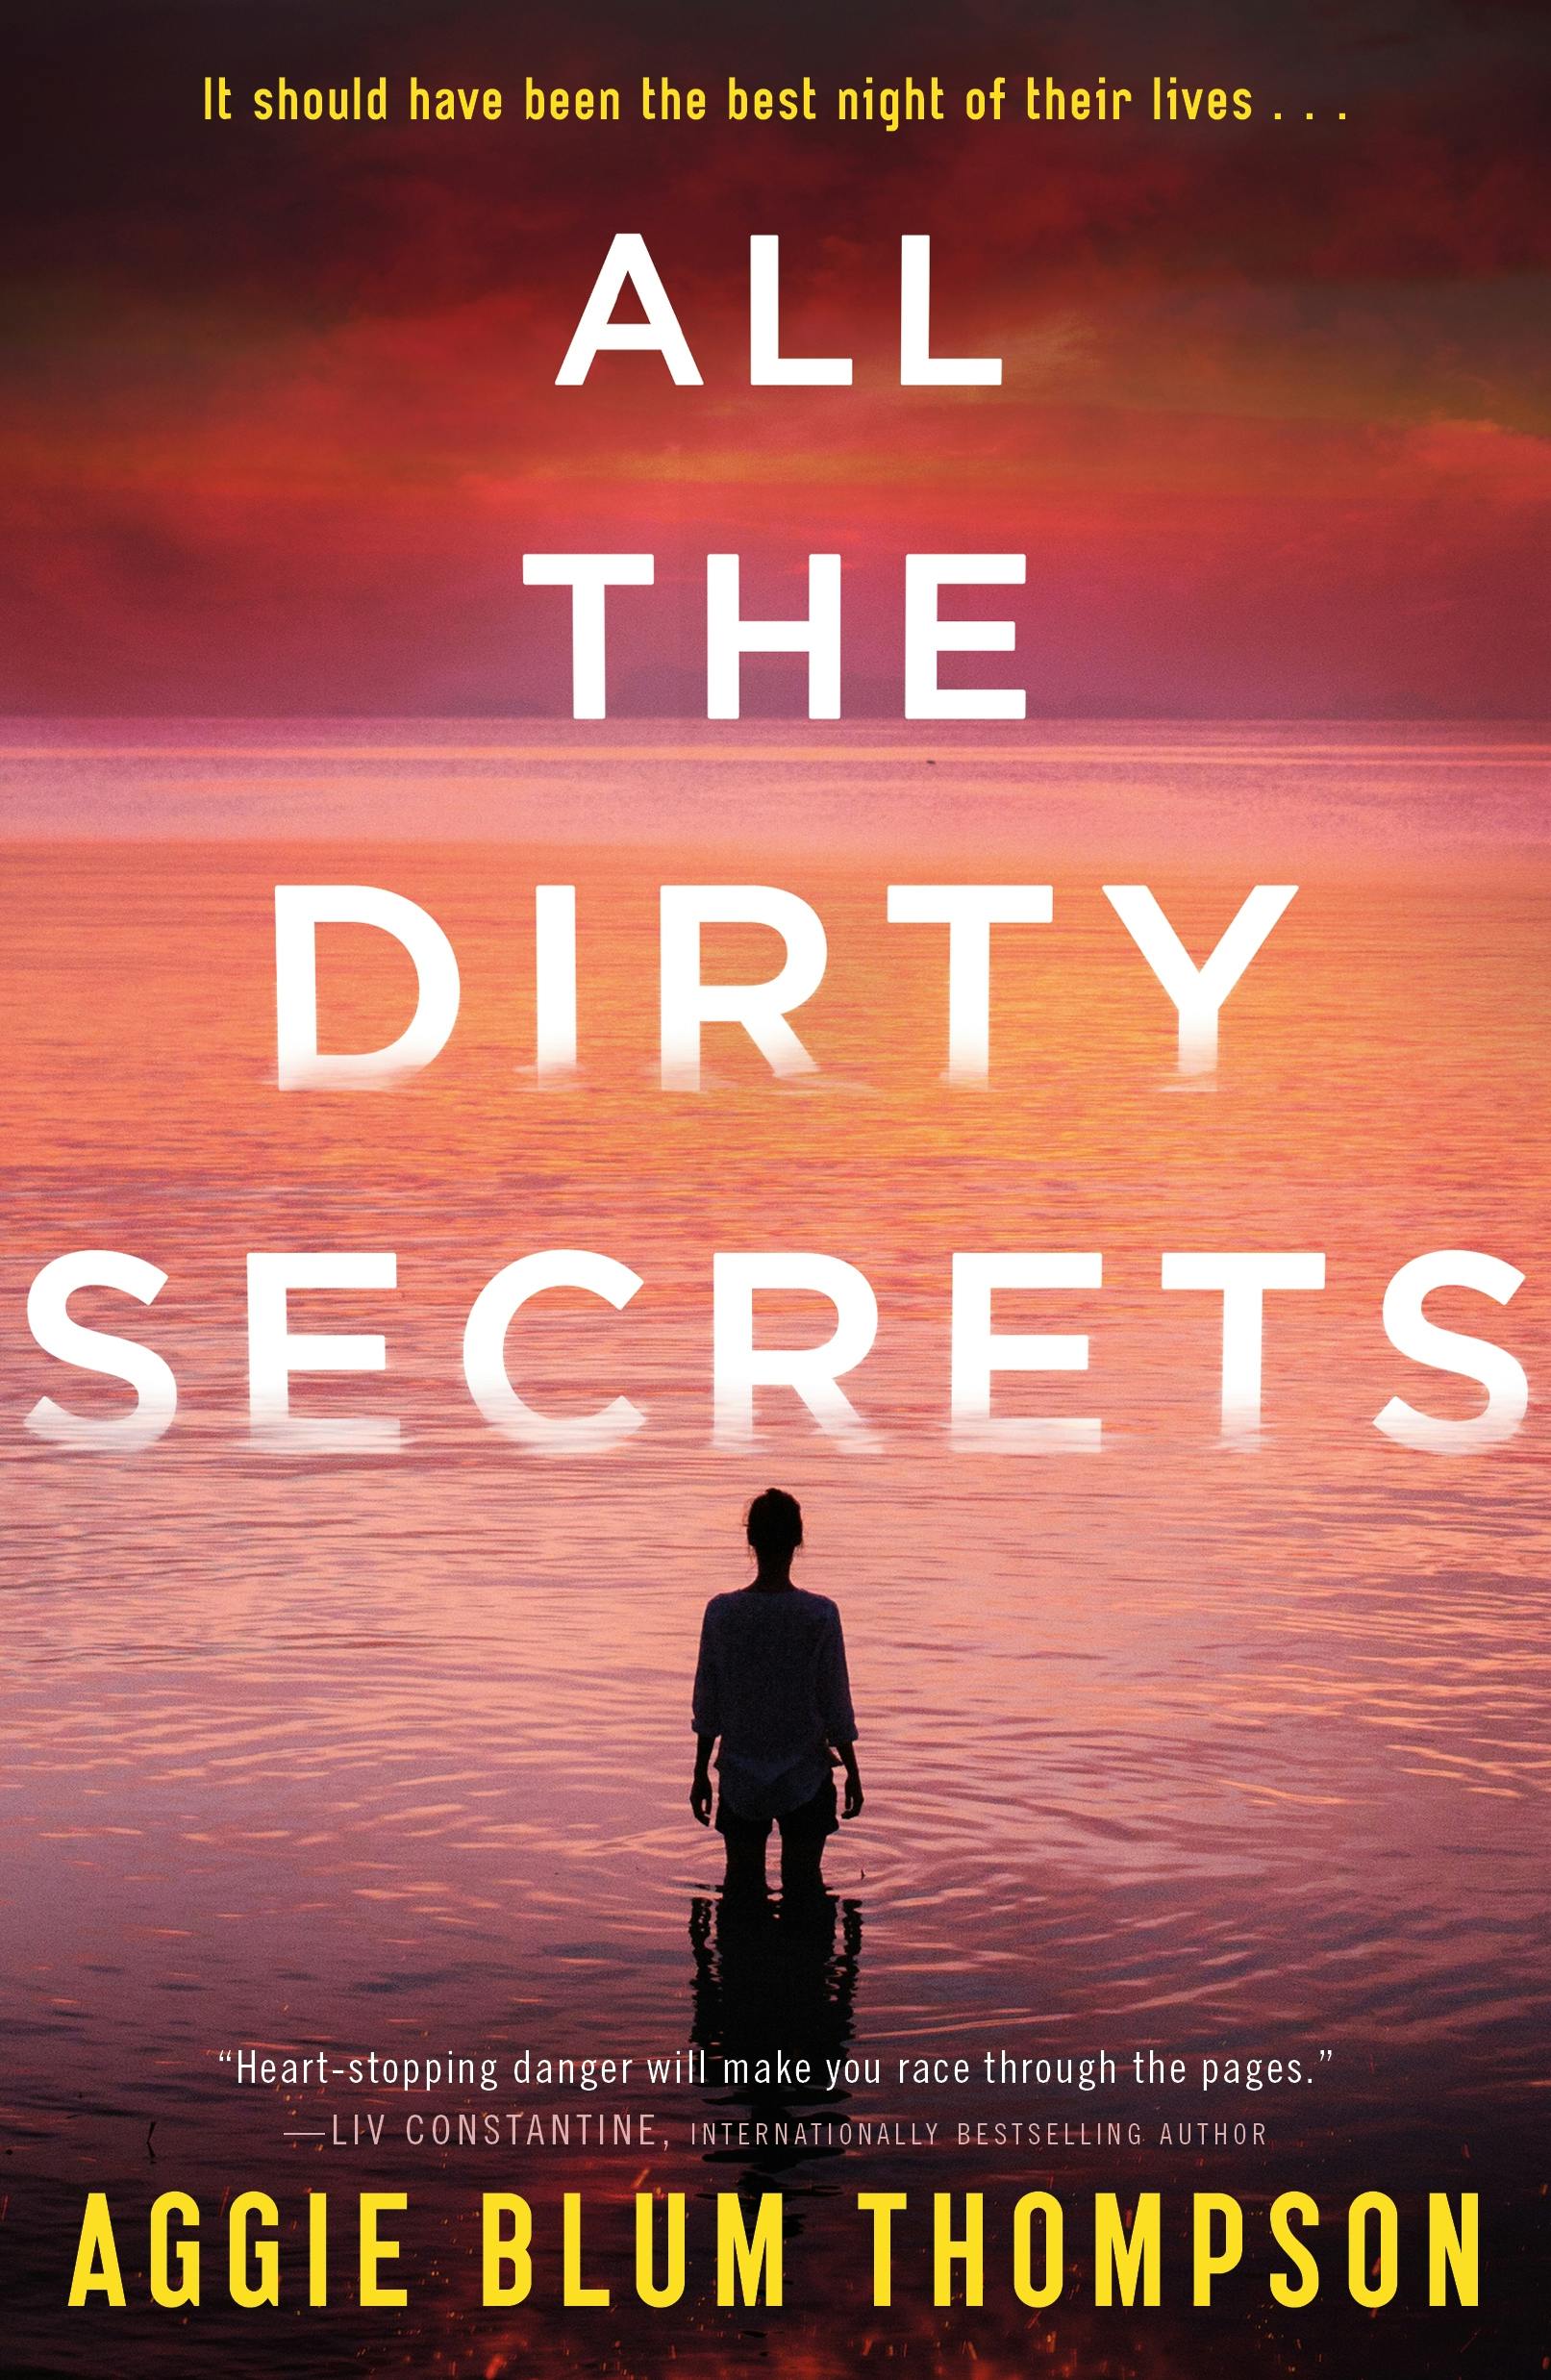 Cover for the book titled as: All the Dirty Secrets